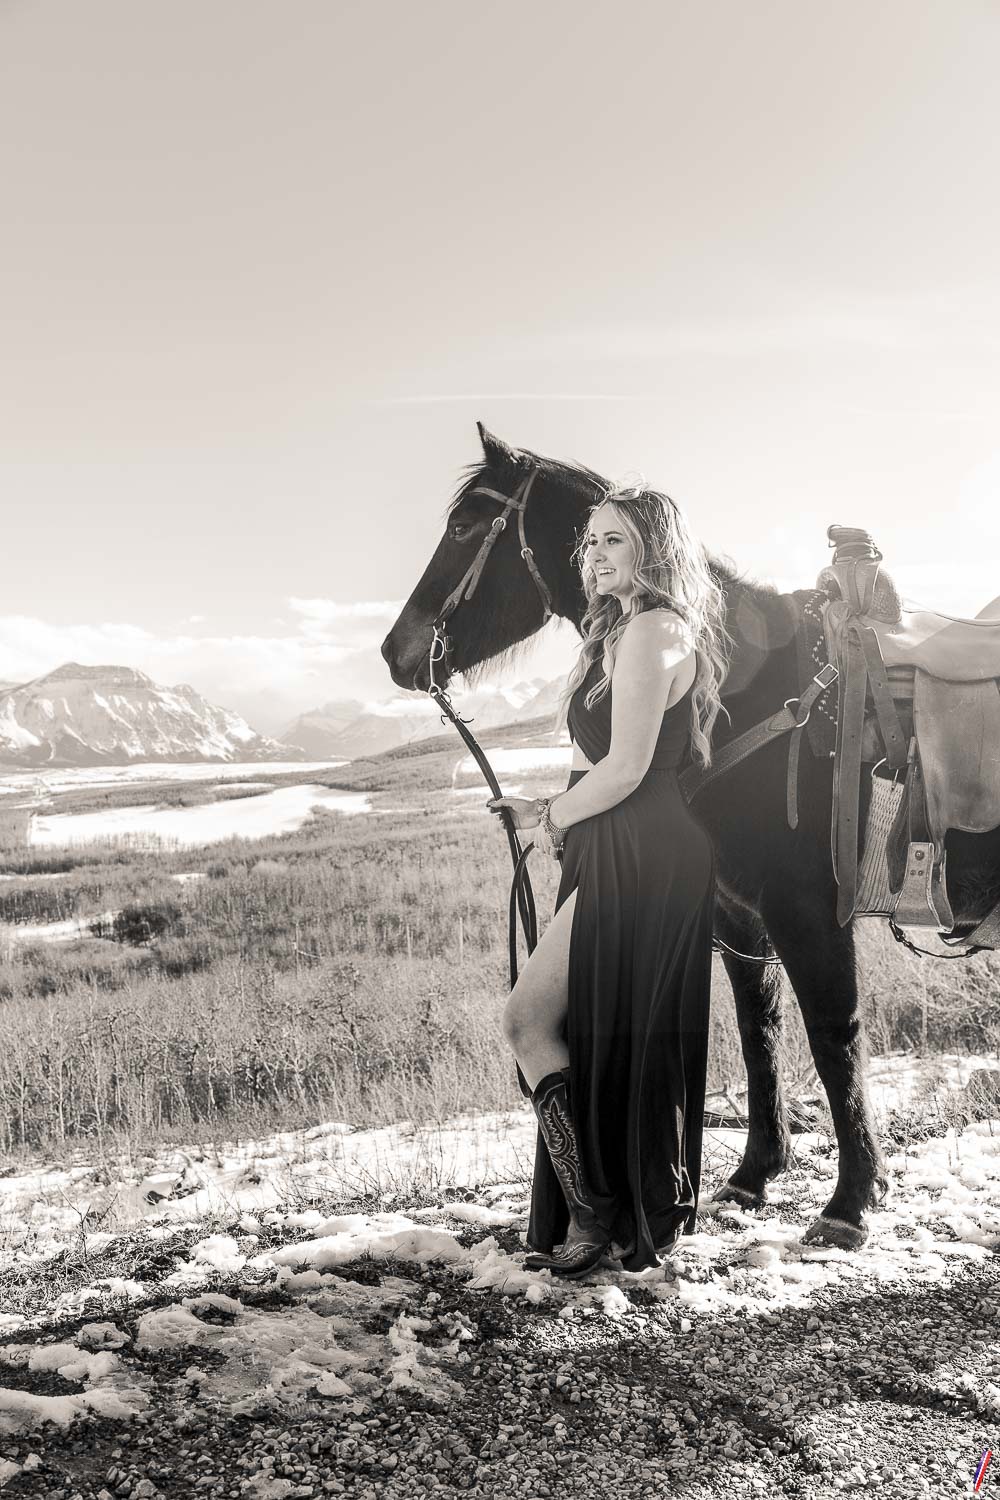 Black long slit dress, cowboy boots and the horse. 